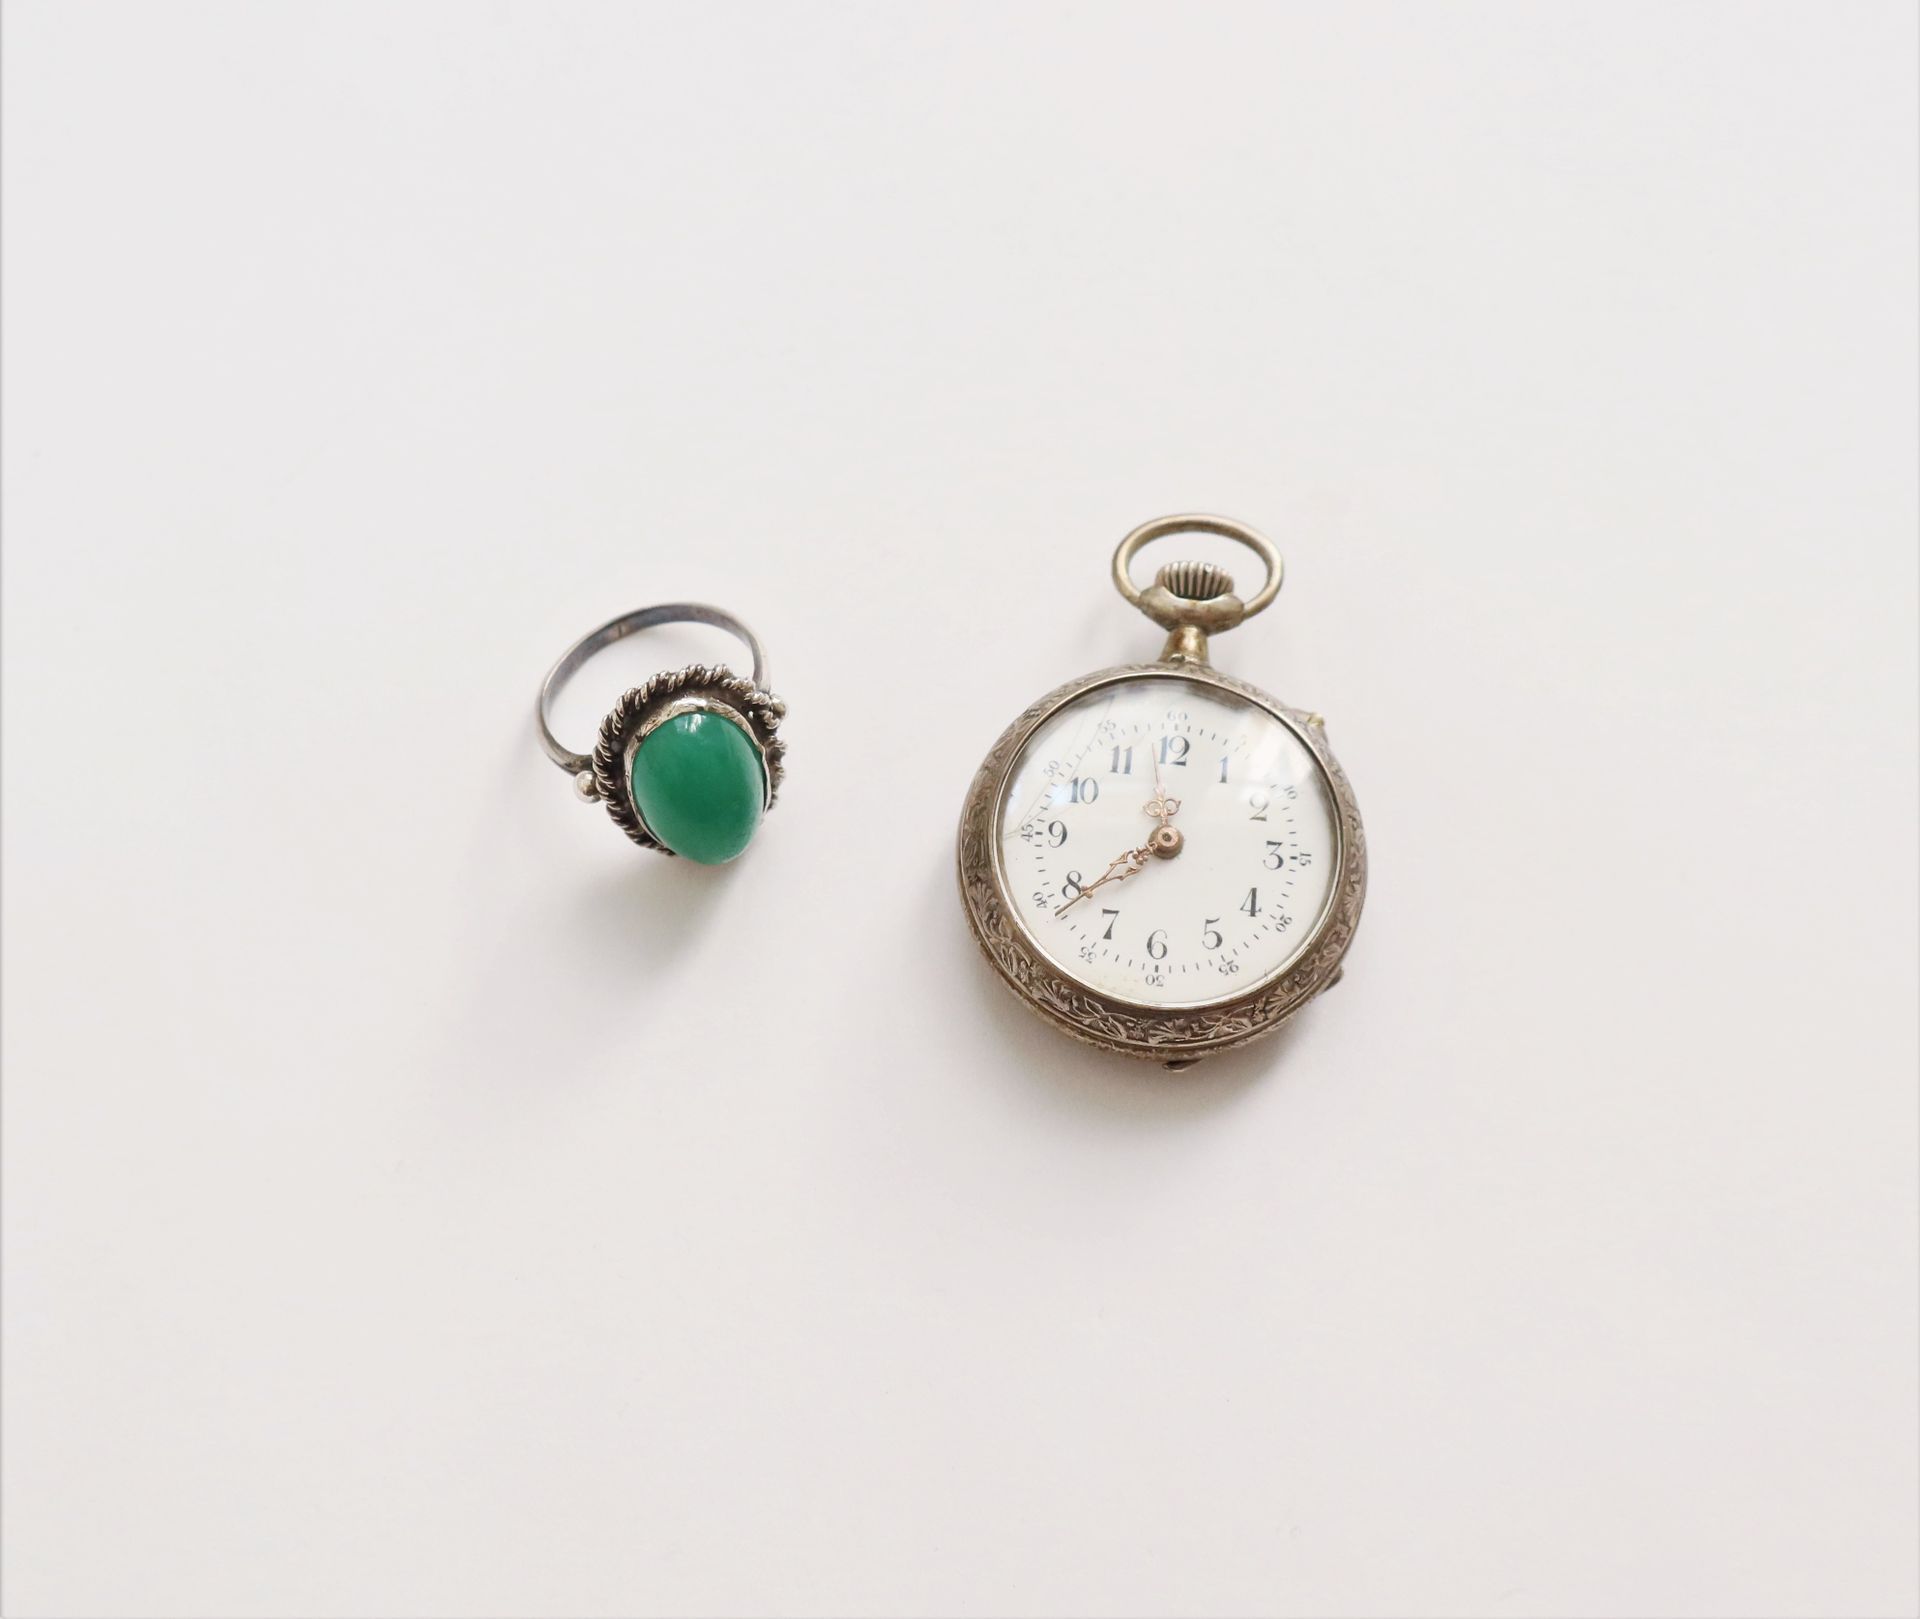 Null Silver set including : a ring and a pocket watch. Gross weight : 26,9 g